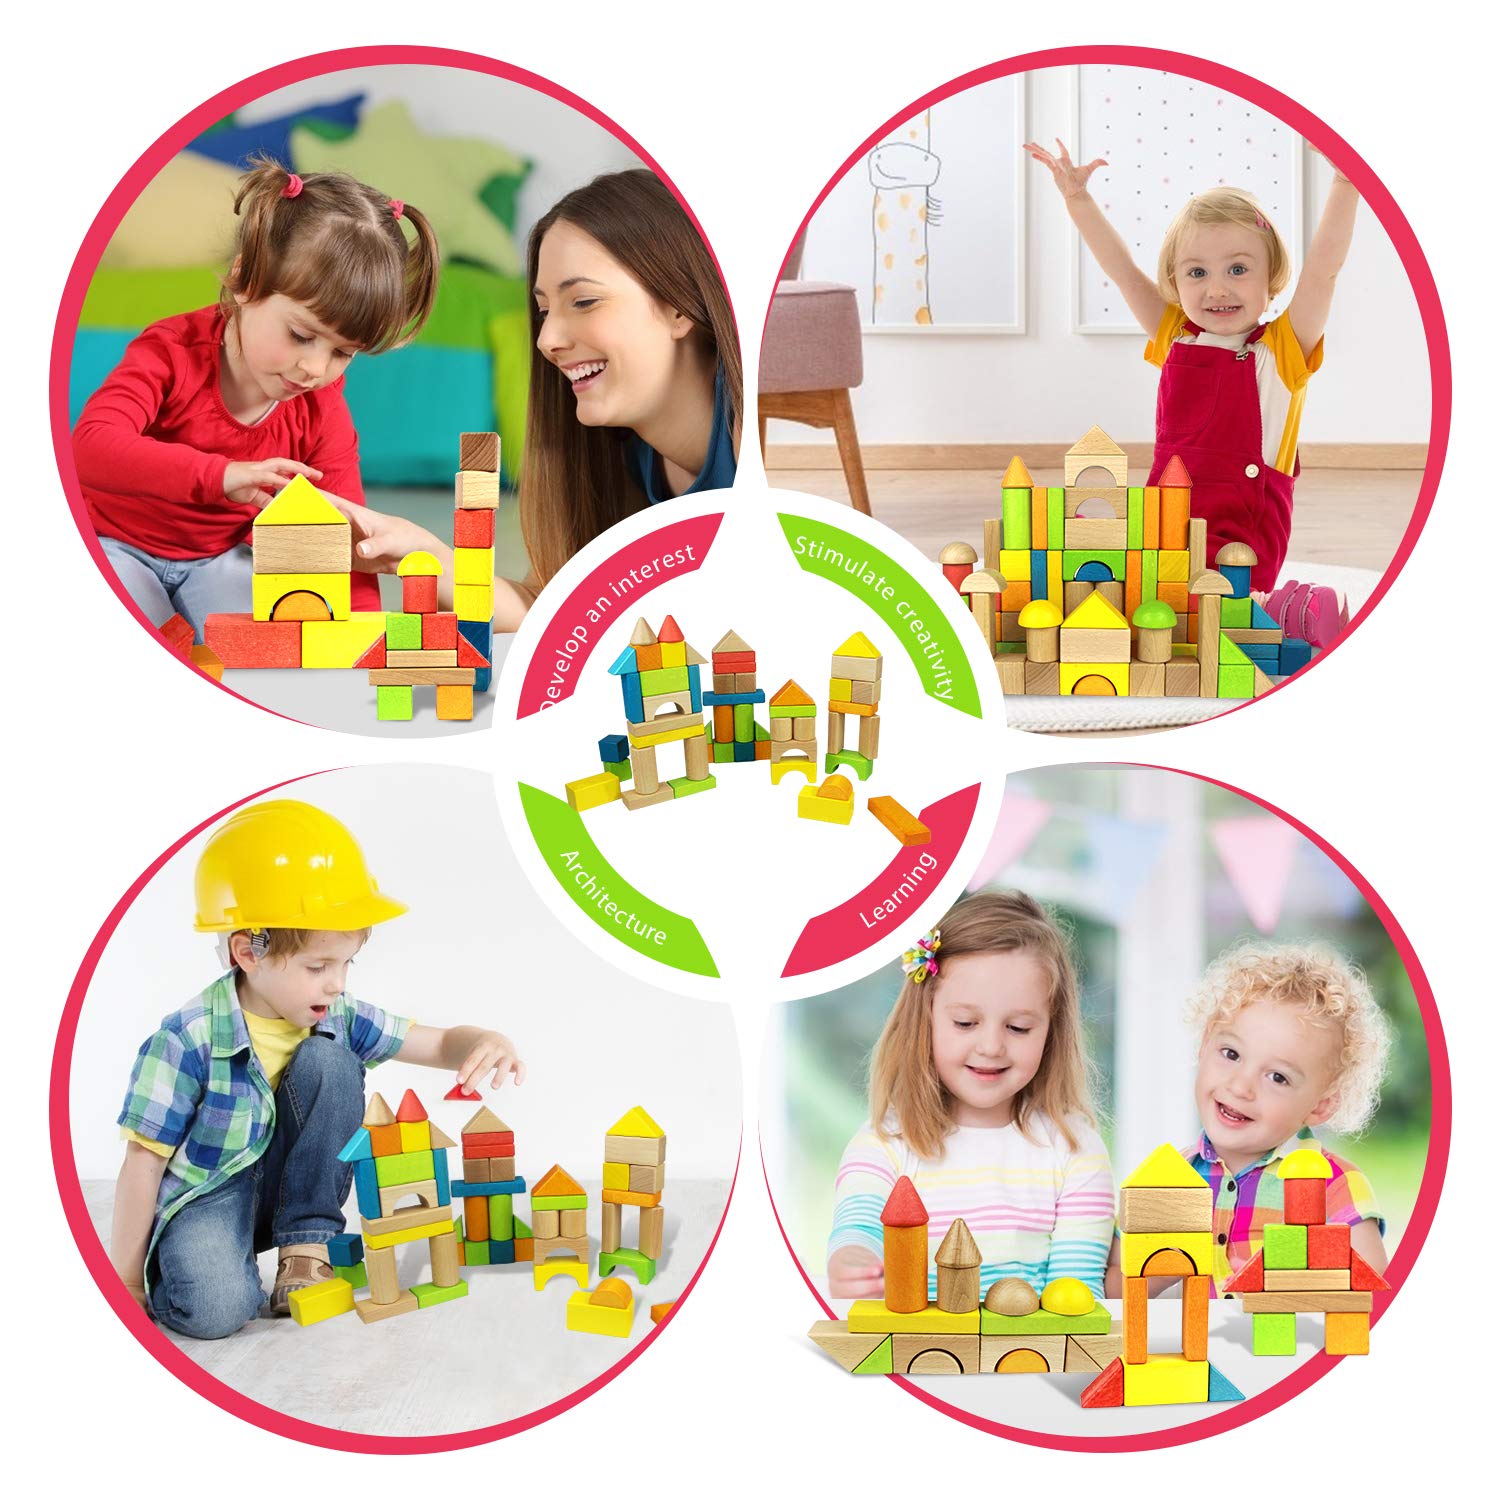 Migargle Wooden Building Blocks Set for Kids - Rainbow Stacker Stacking Game Construction Toys Set Preschool Colorful Learning Educational Toys - Geometry Wooden Blocks for Boys & Girls